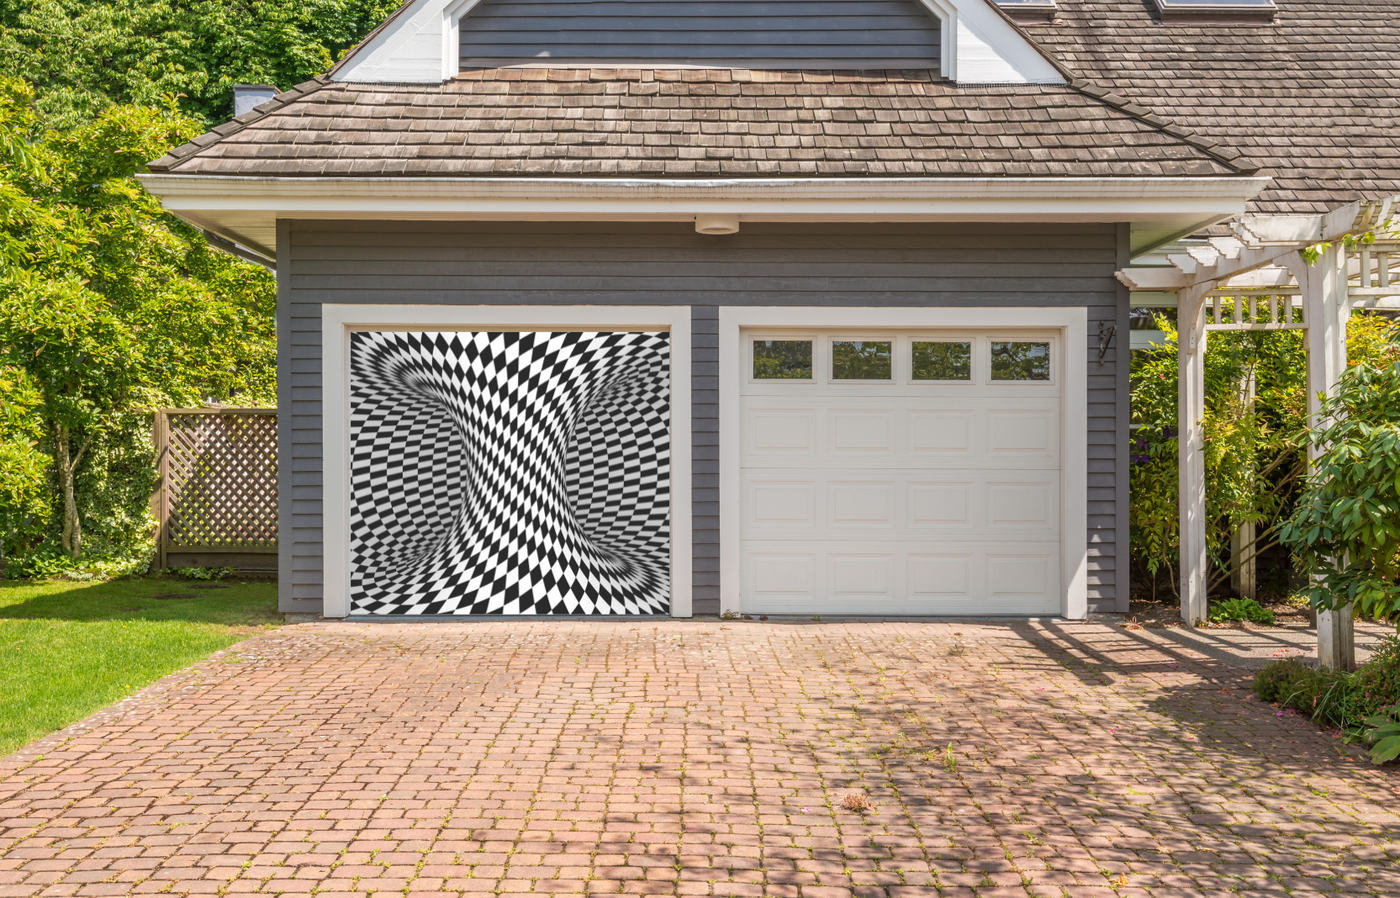 Black and White Checkers Psychedelic Garage Door Cover Wrap